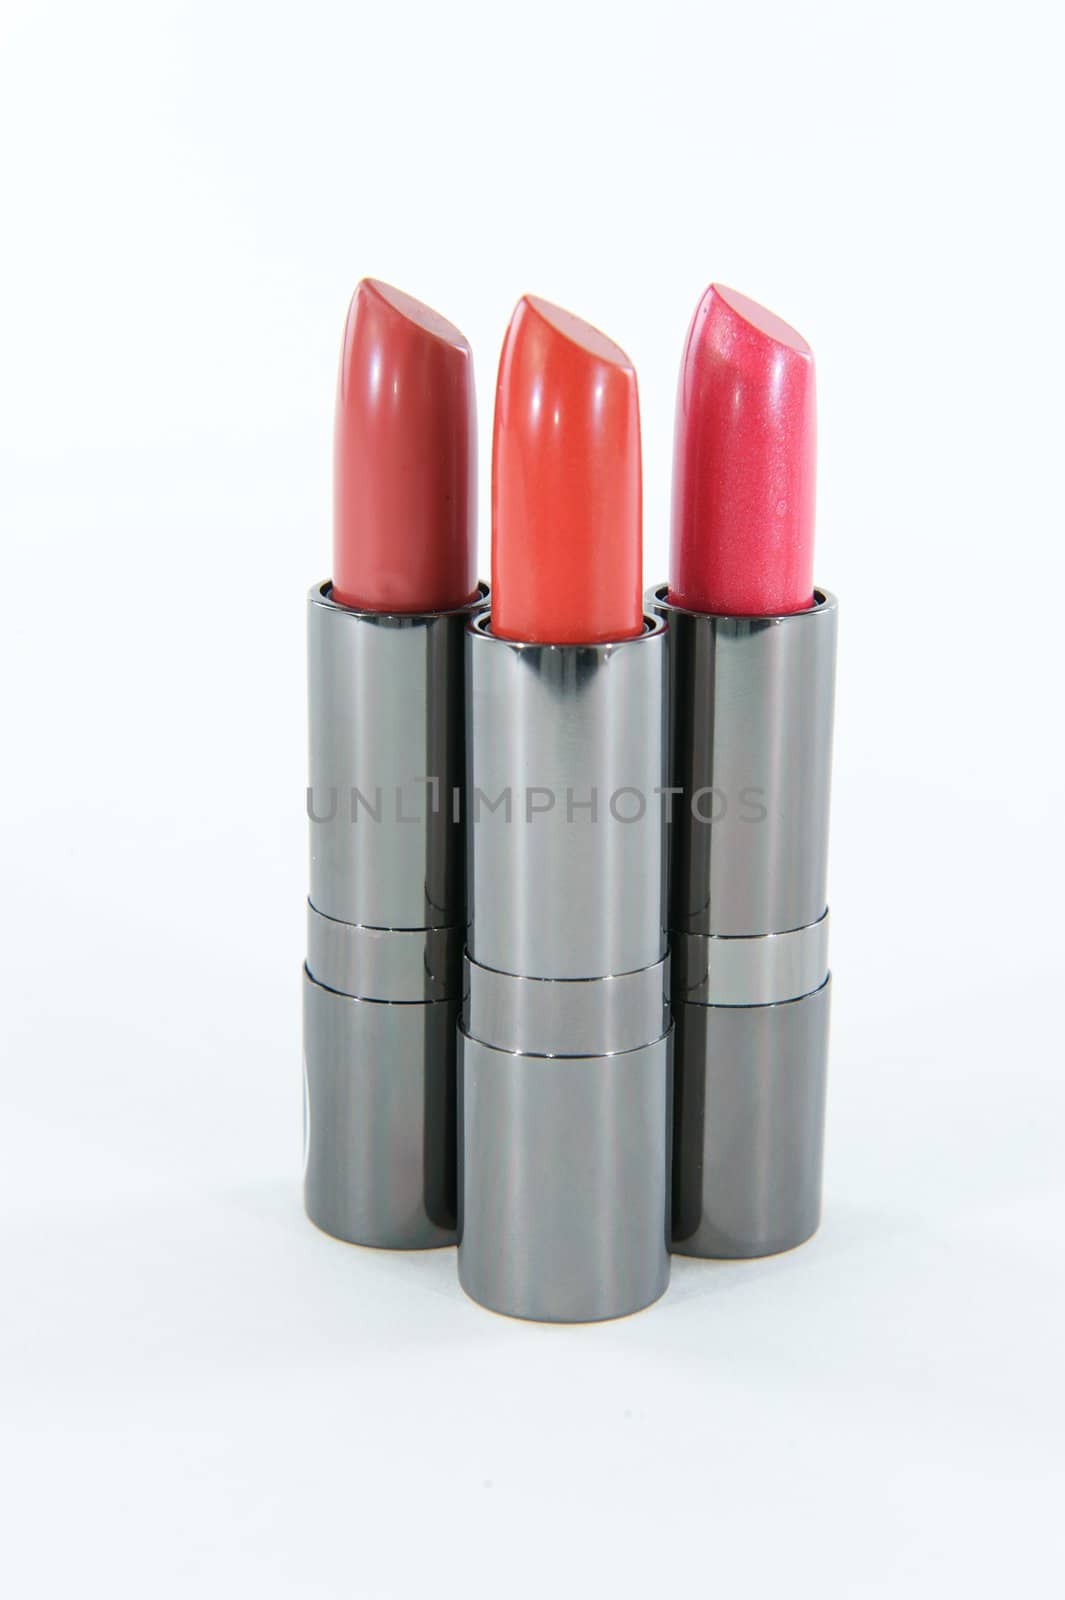 Three lipstick cases standing in a cluster on a white or blank background